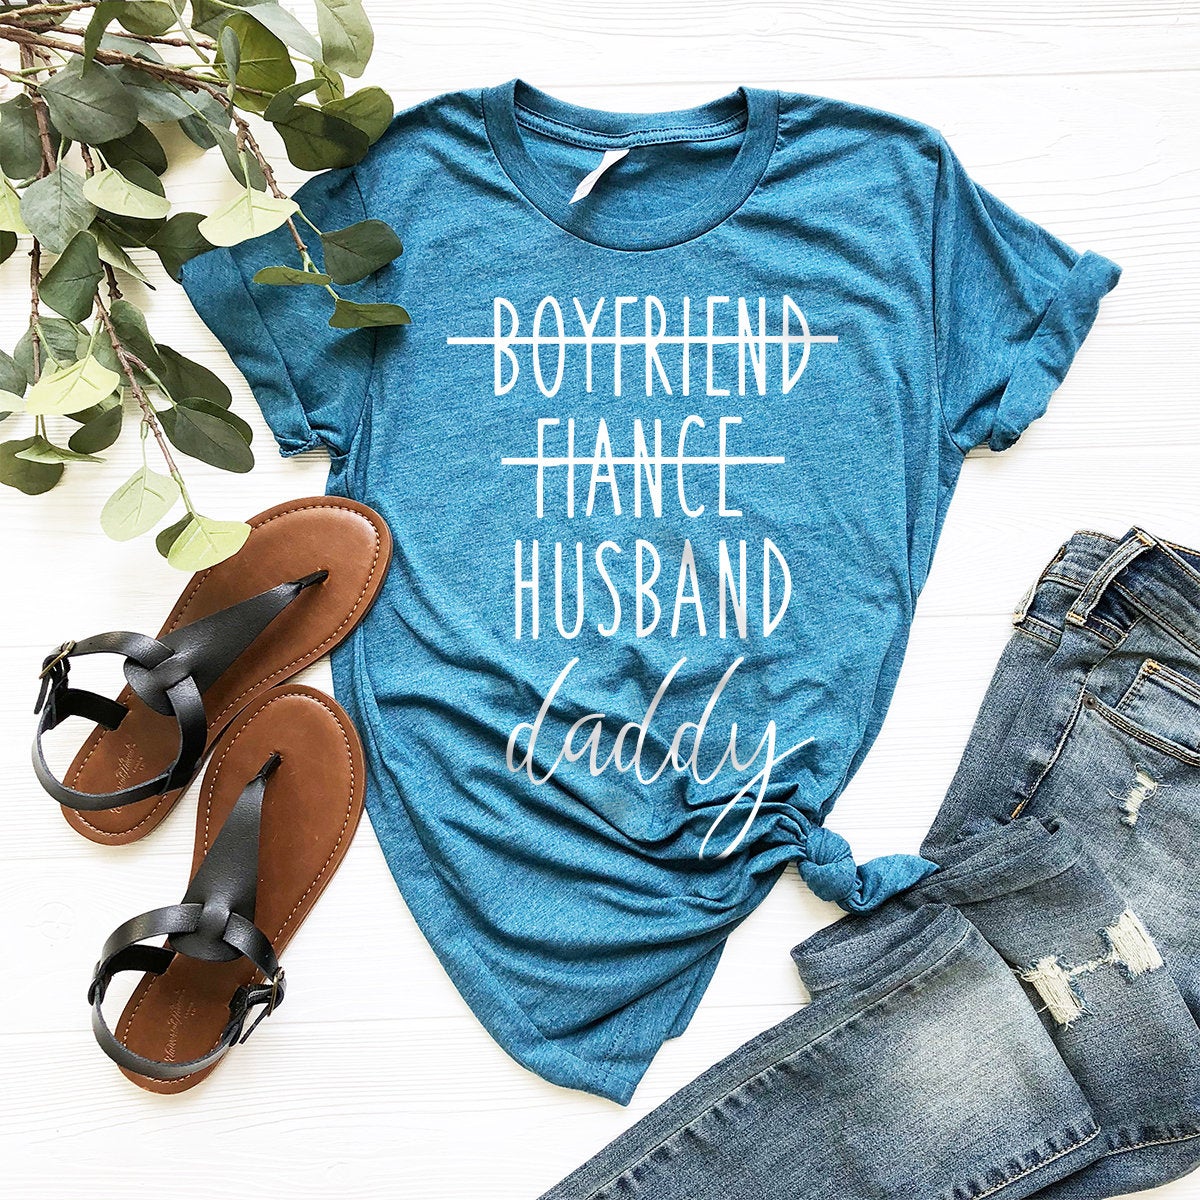 New Dad New Mom Shirt, New Parents Gift, Pregnancy Announcement Shirt, Husband Daddy Wife Mommy Shirt, Matching Parents Shirt - Fastdeliverytees.com